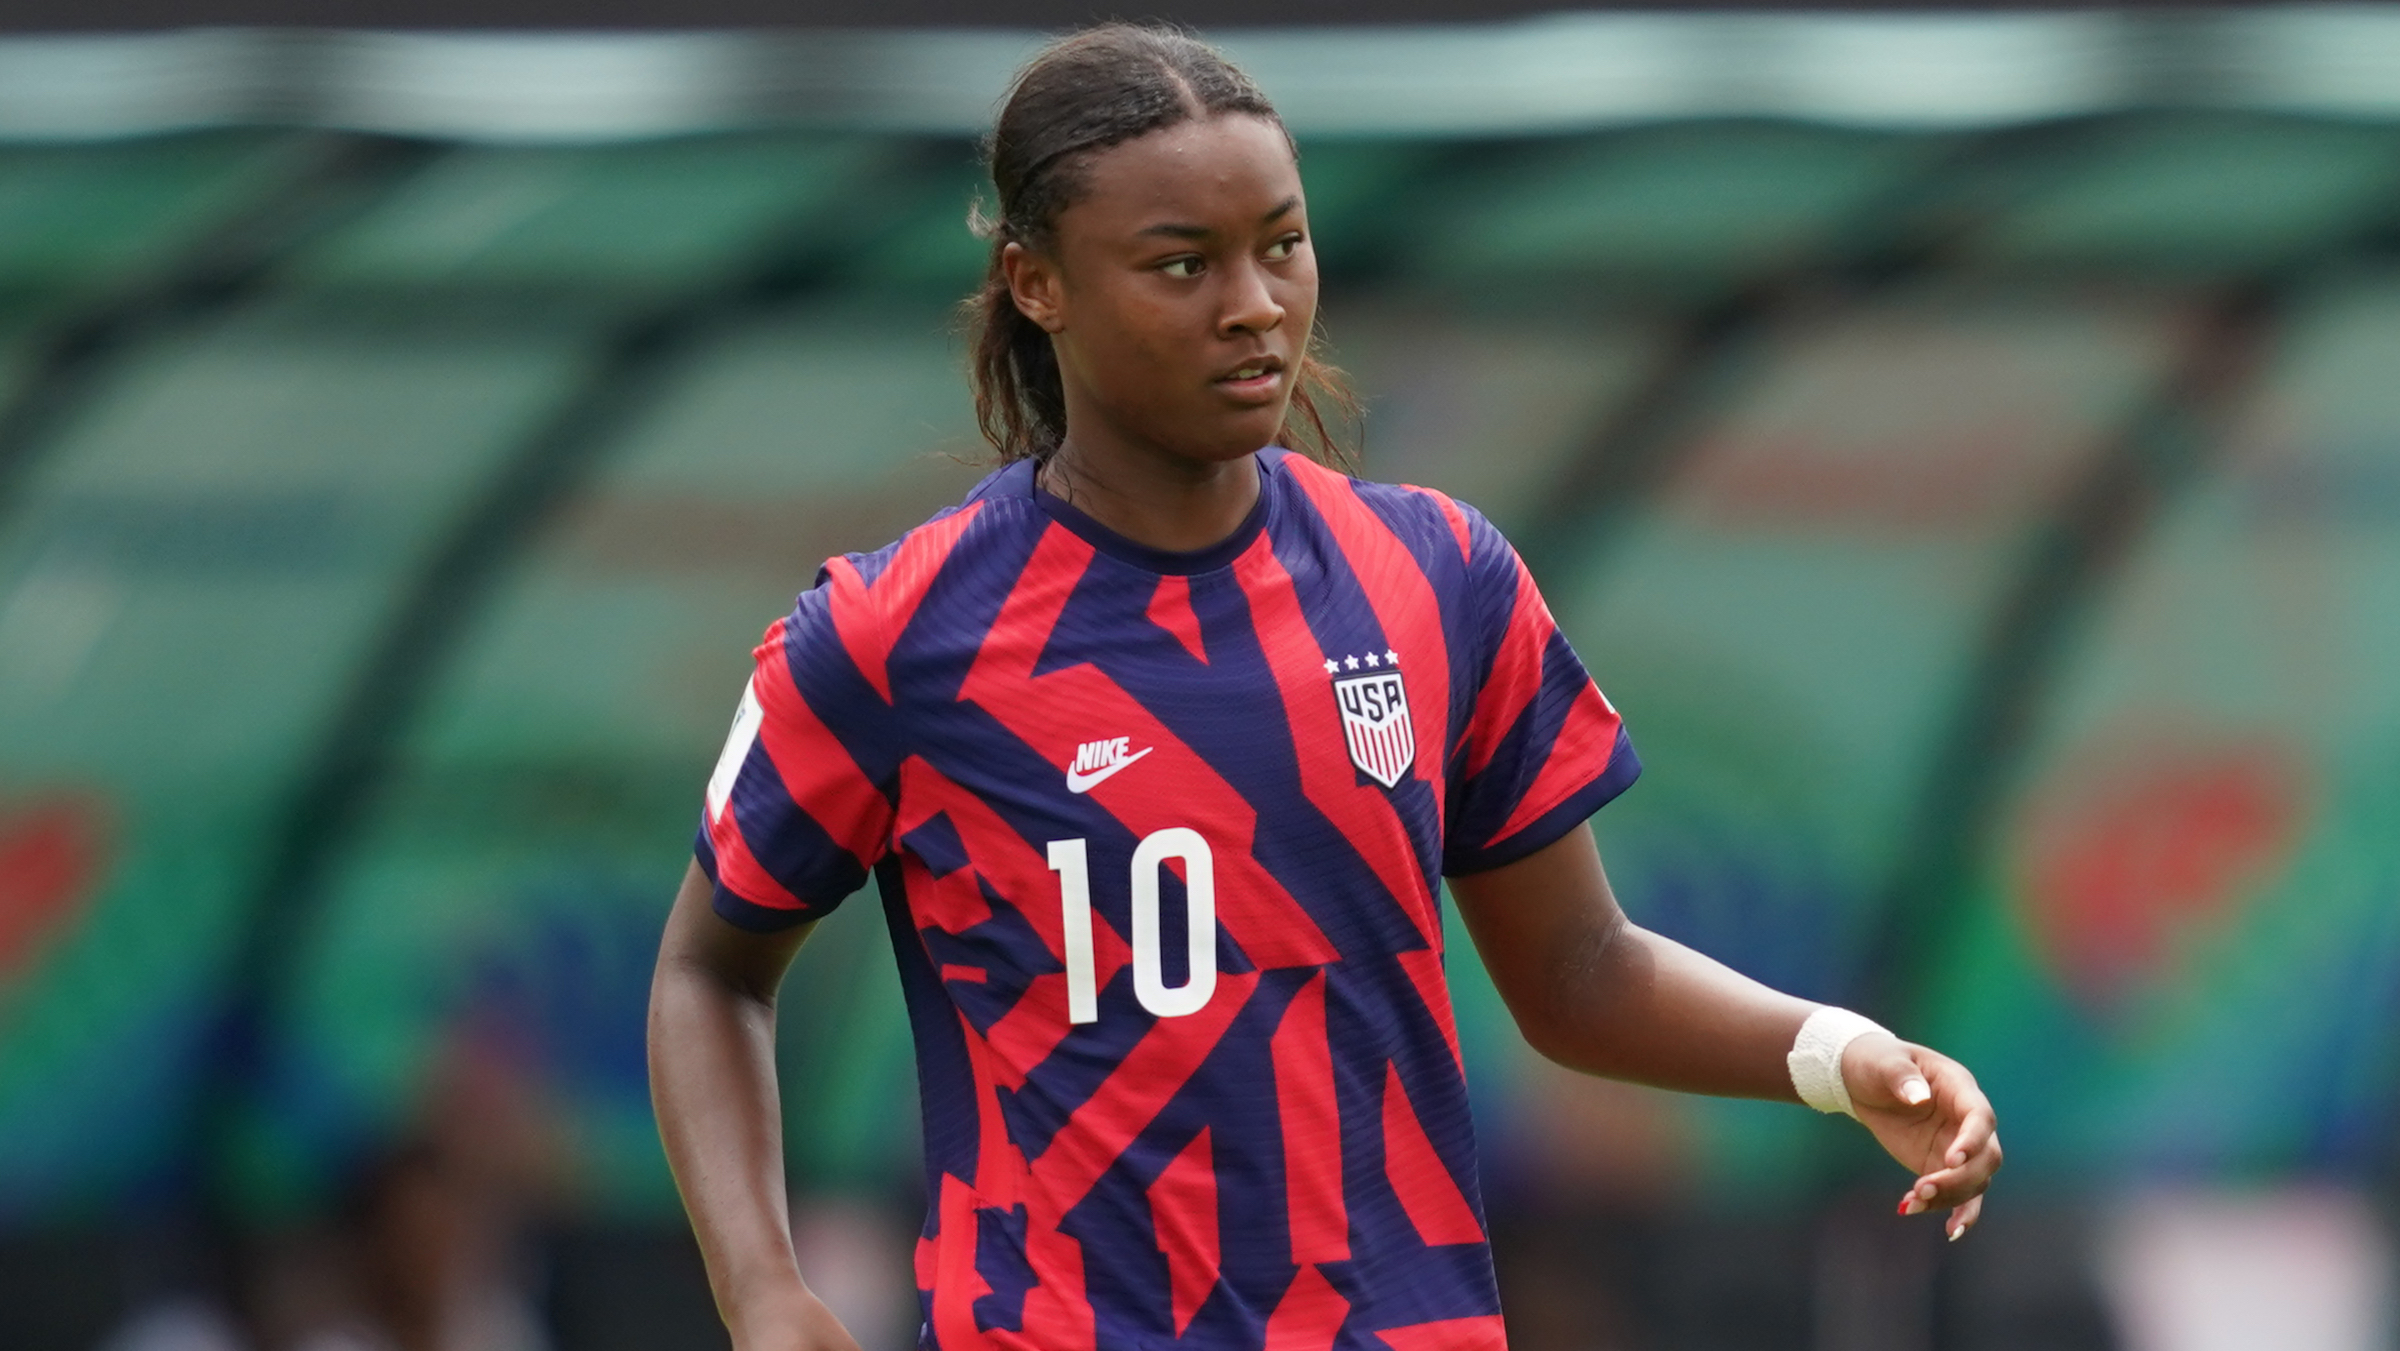 Jaedyn Shaw voted 2022 U.S. Soccer Young Female Player of the Year